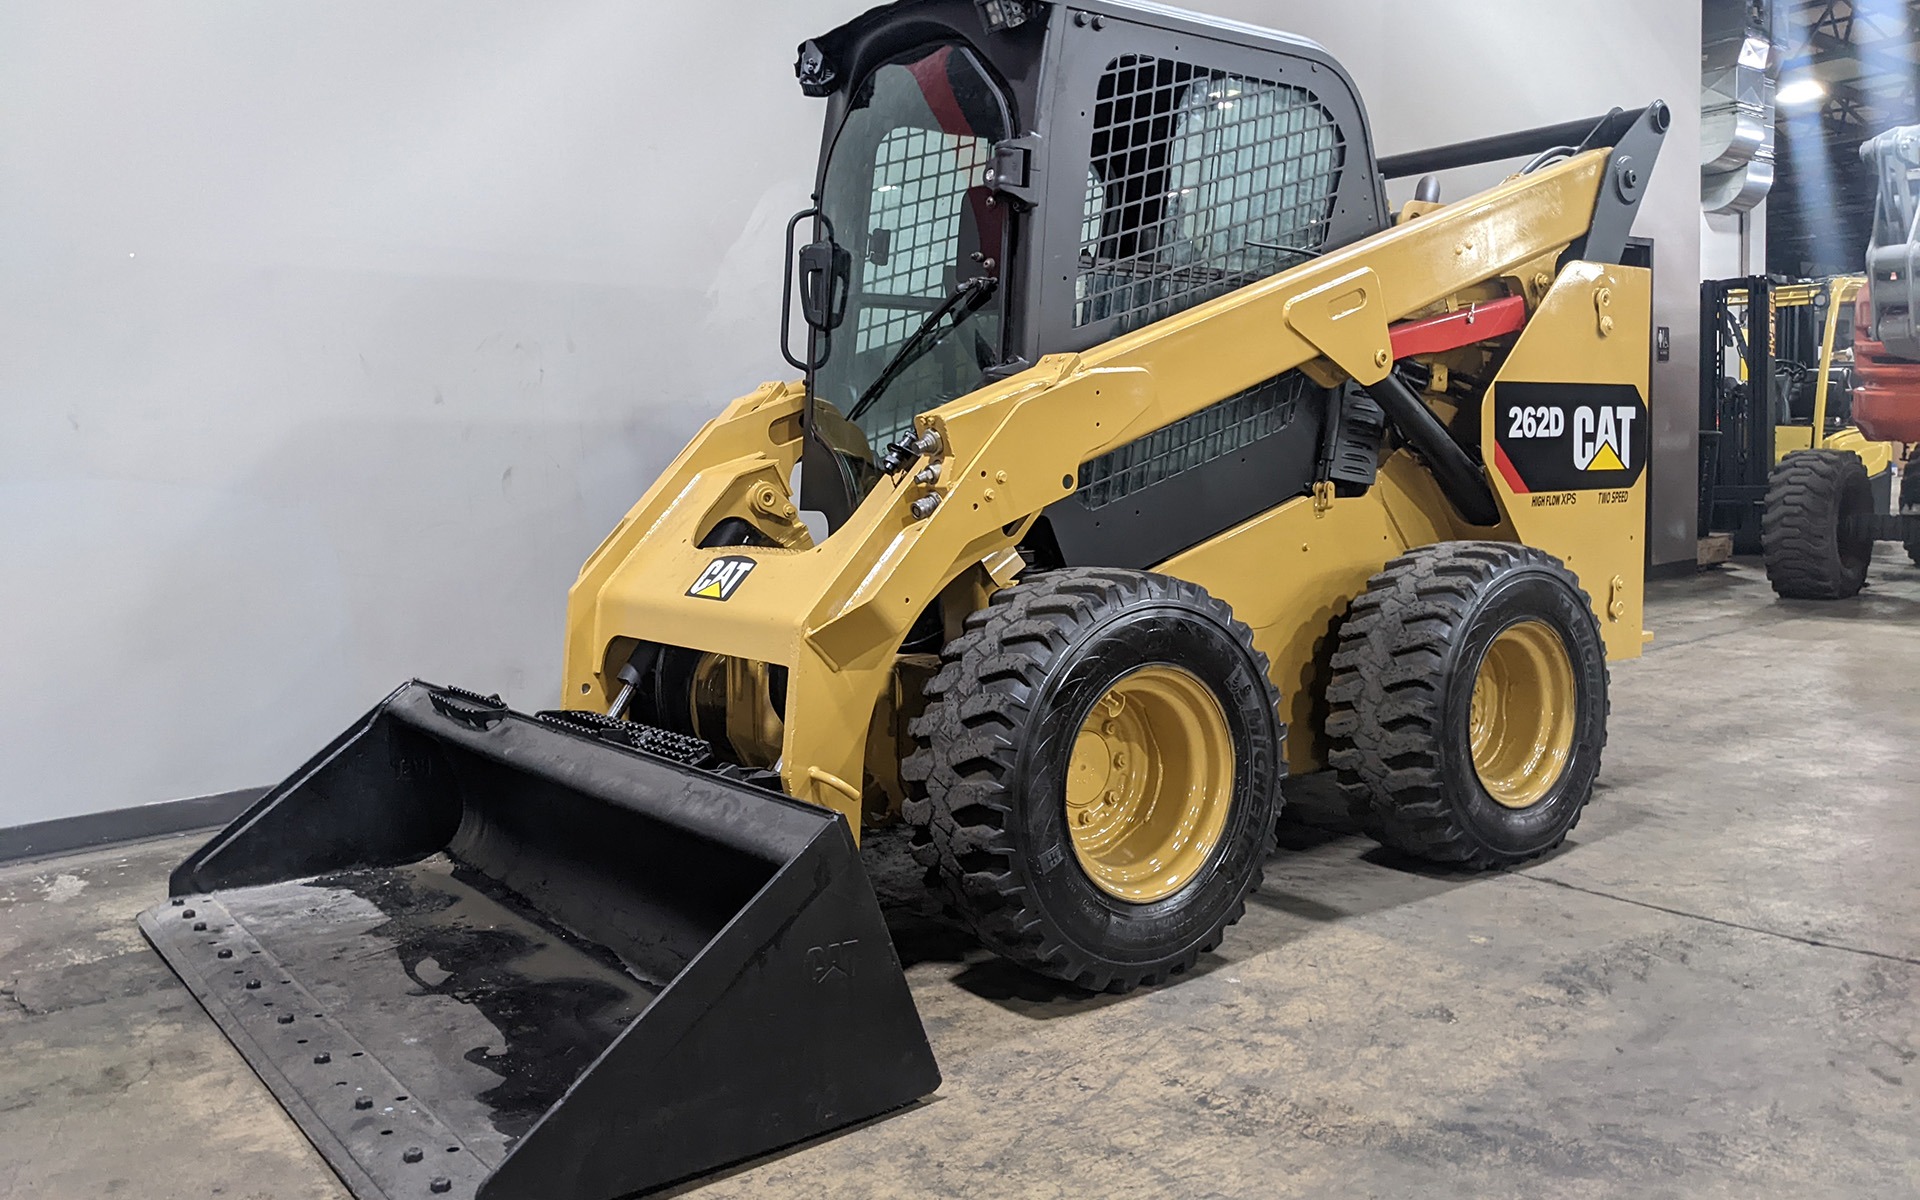 Used 2019 CATERPILLAR 262D  | Cary, IL